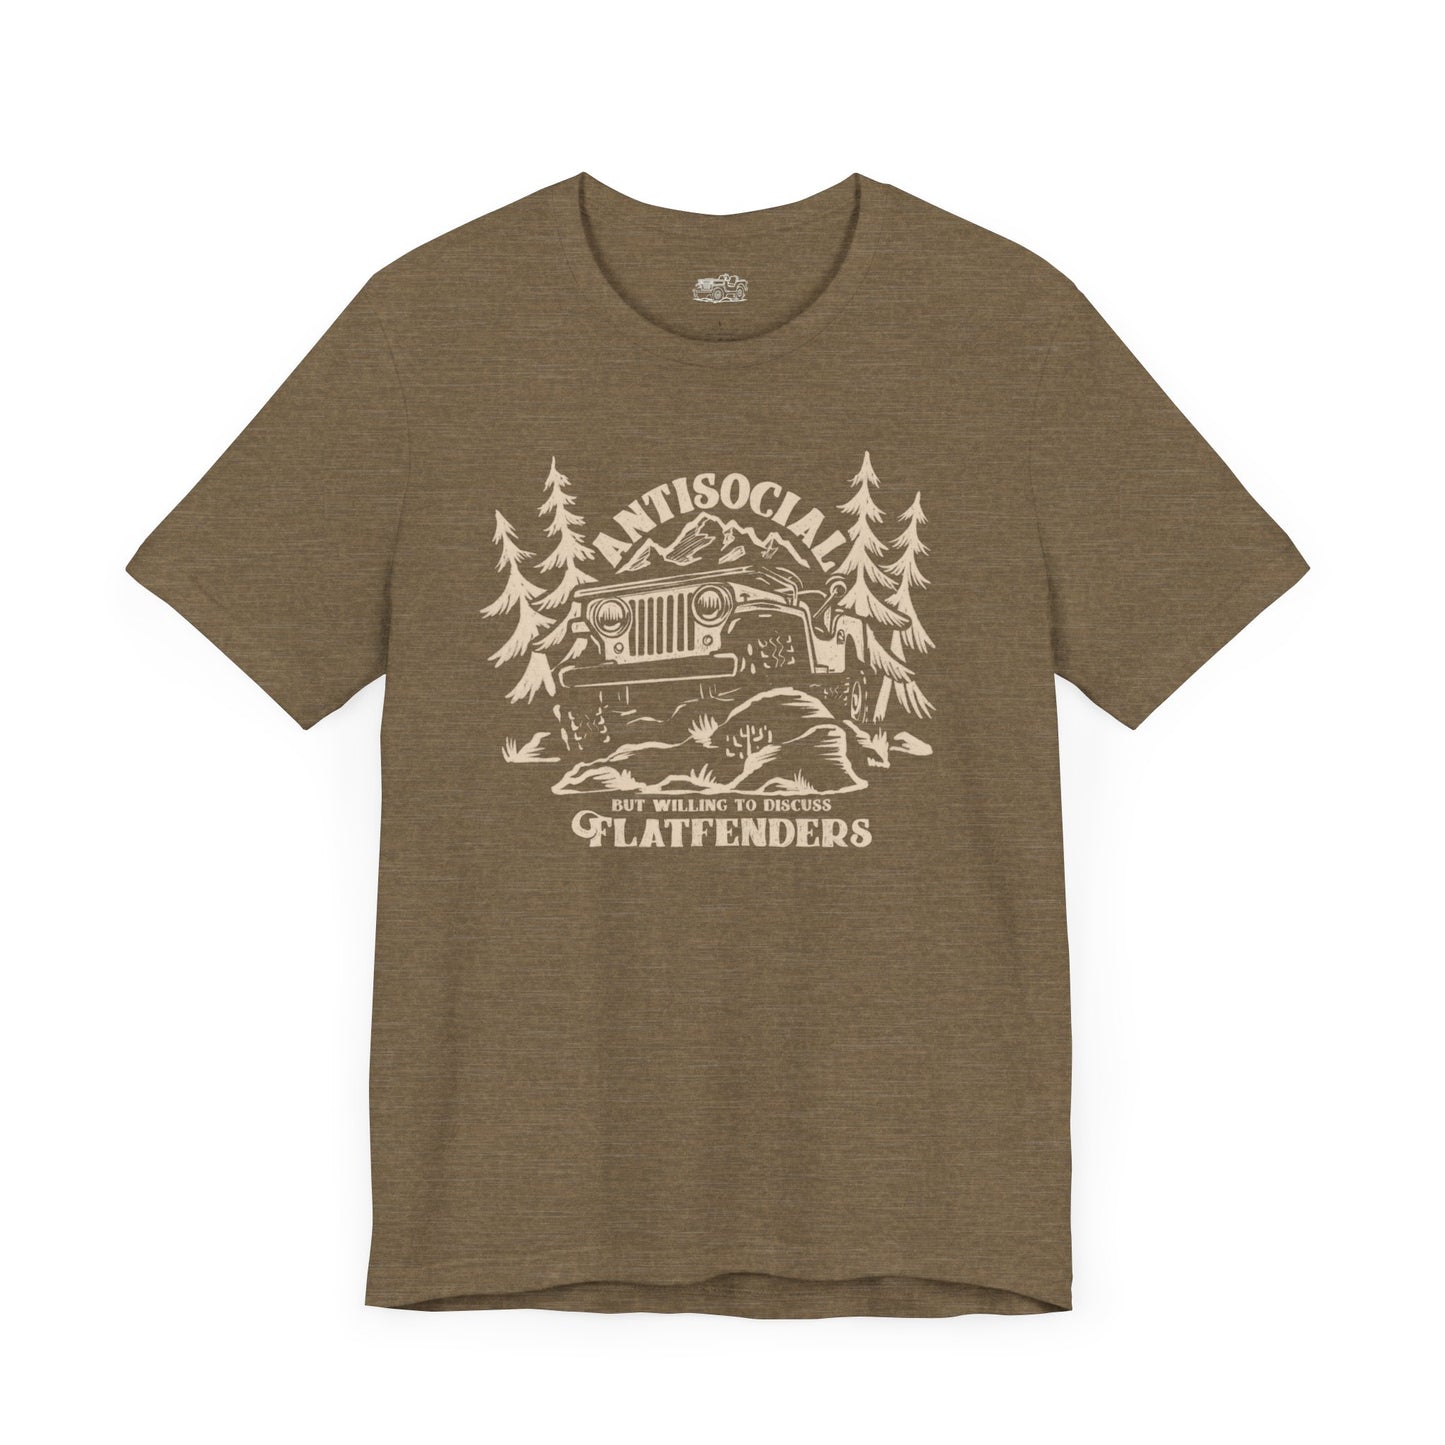 Willing to Discuss Flatfenders T-Shirt